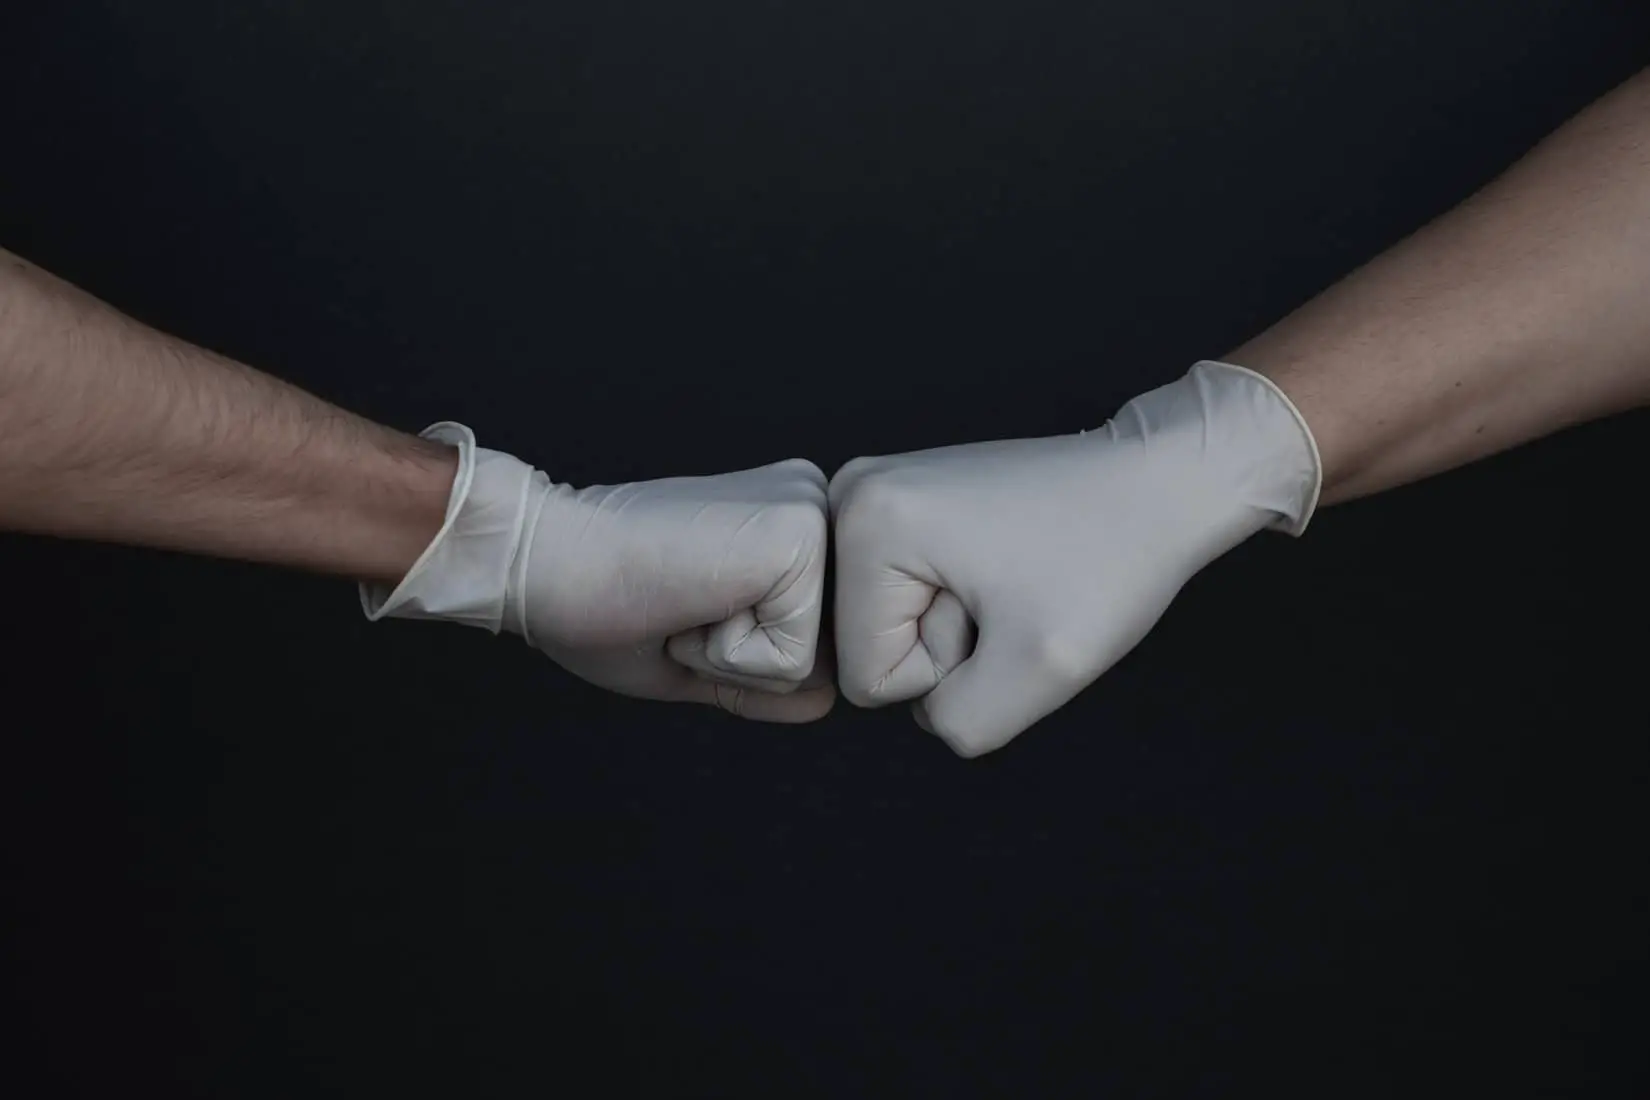 Two people with surgical gloves fist bumping